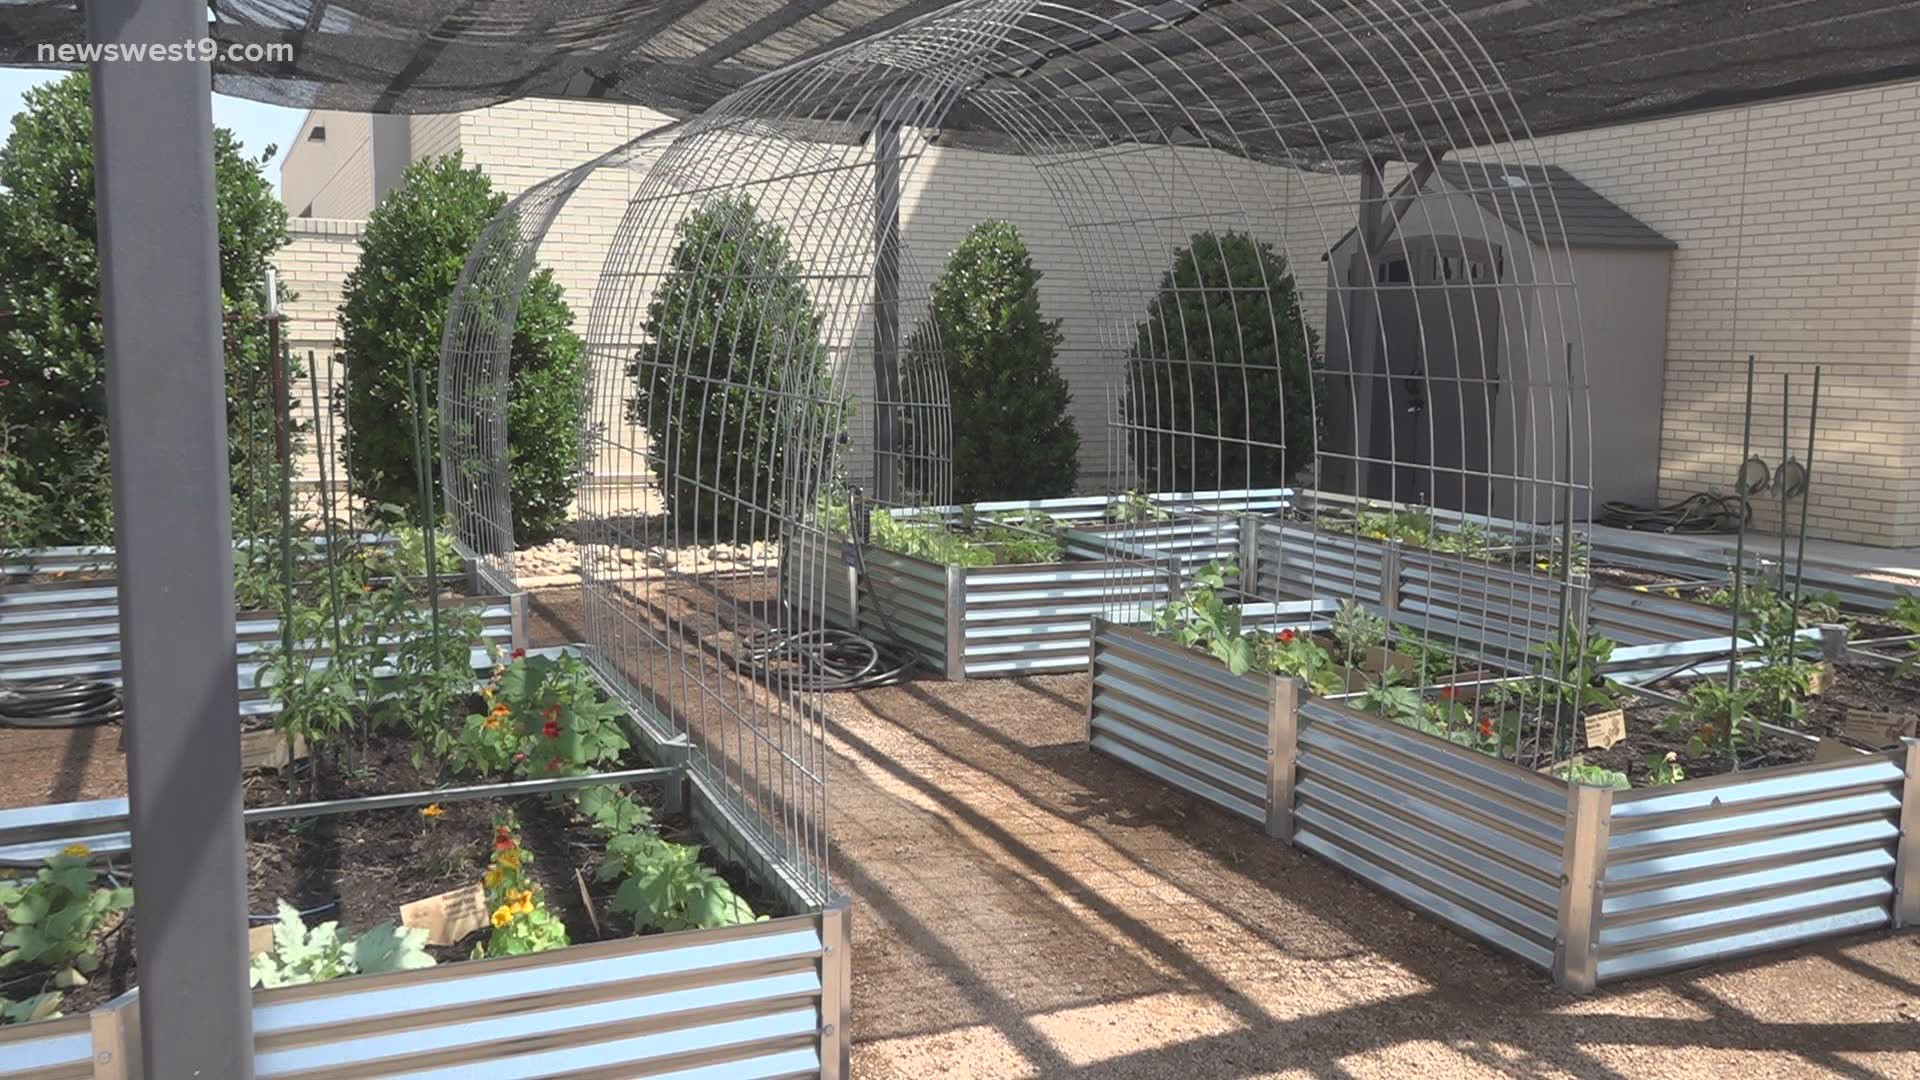 The Odessa College food pantry has expanded by adding a new garden on campus that is providing  students and staff with fresh produce all year long.